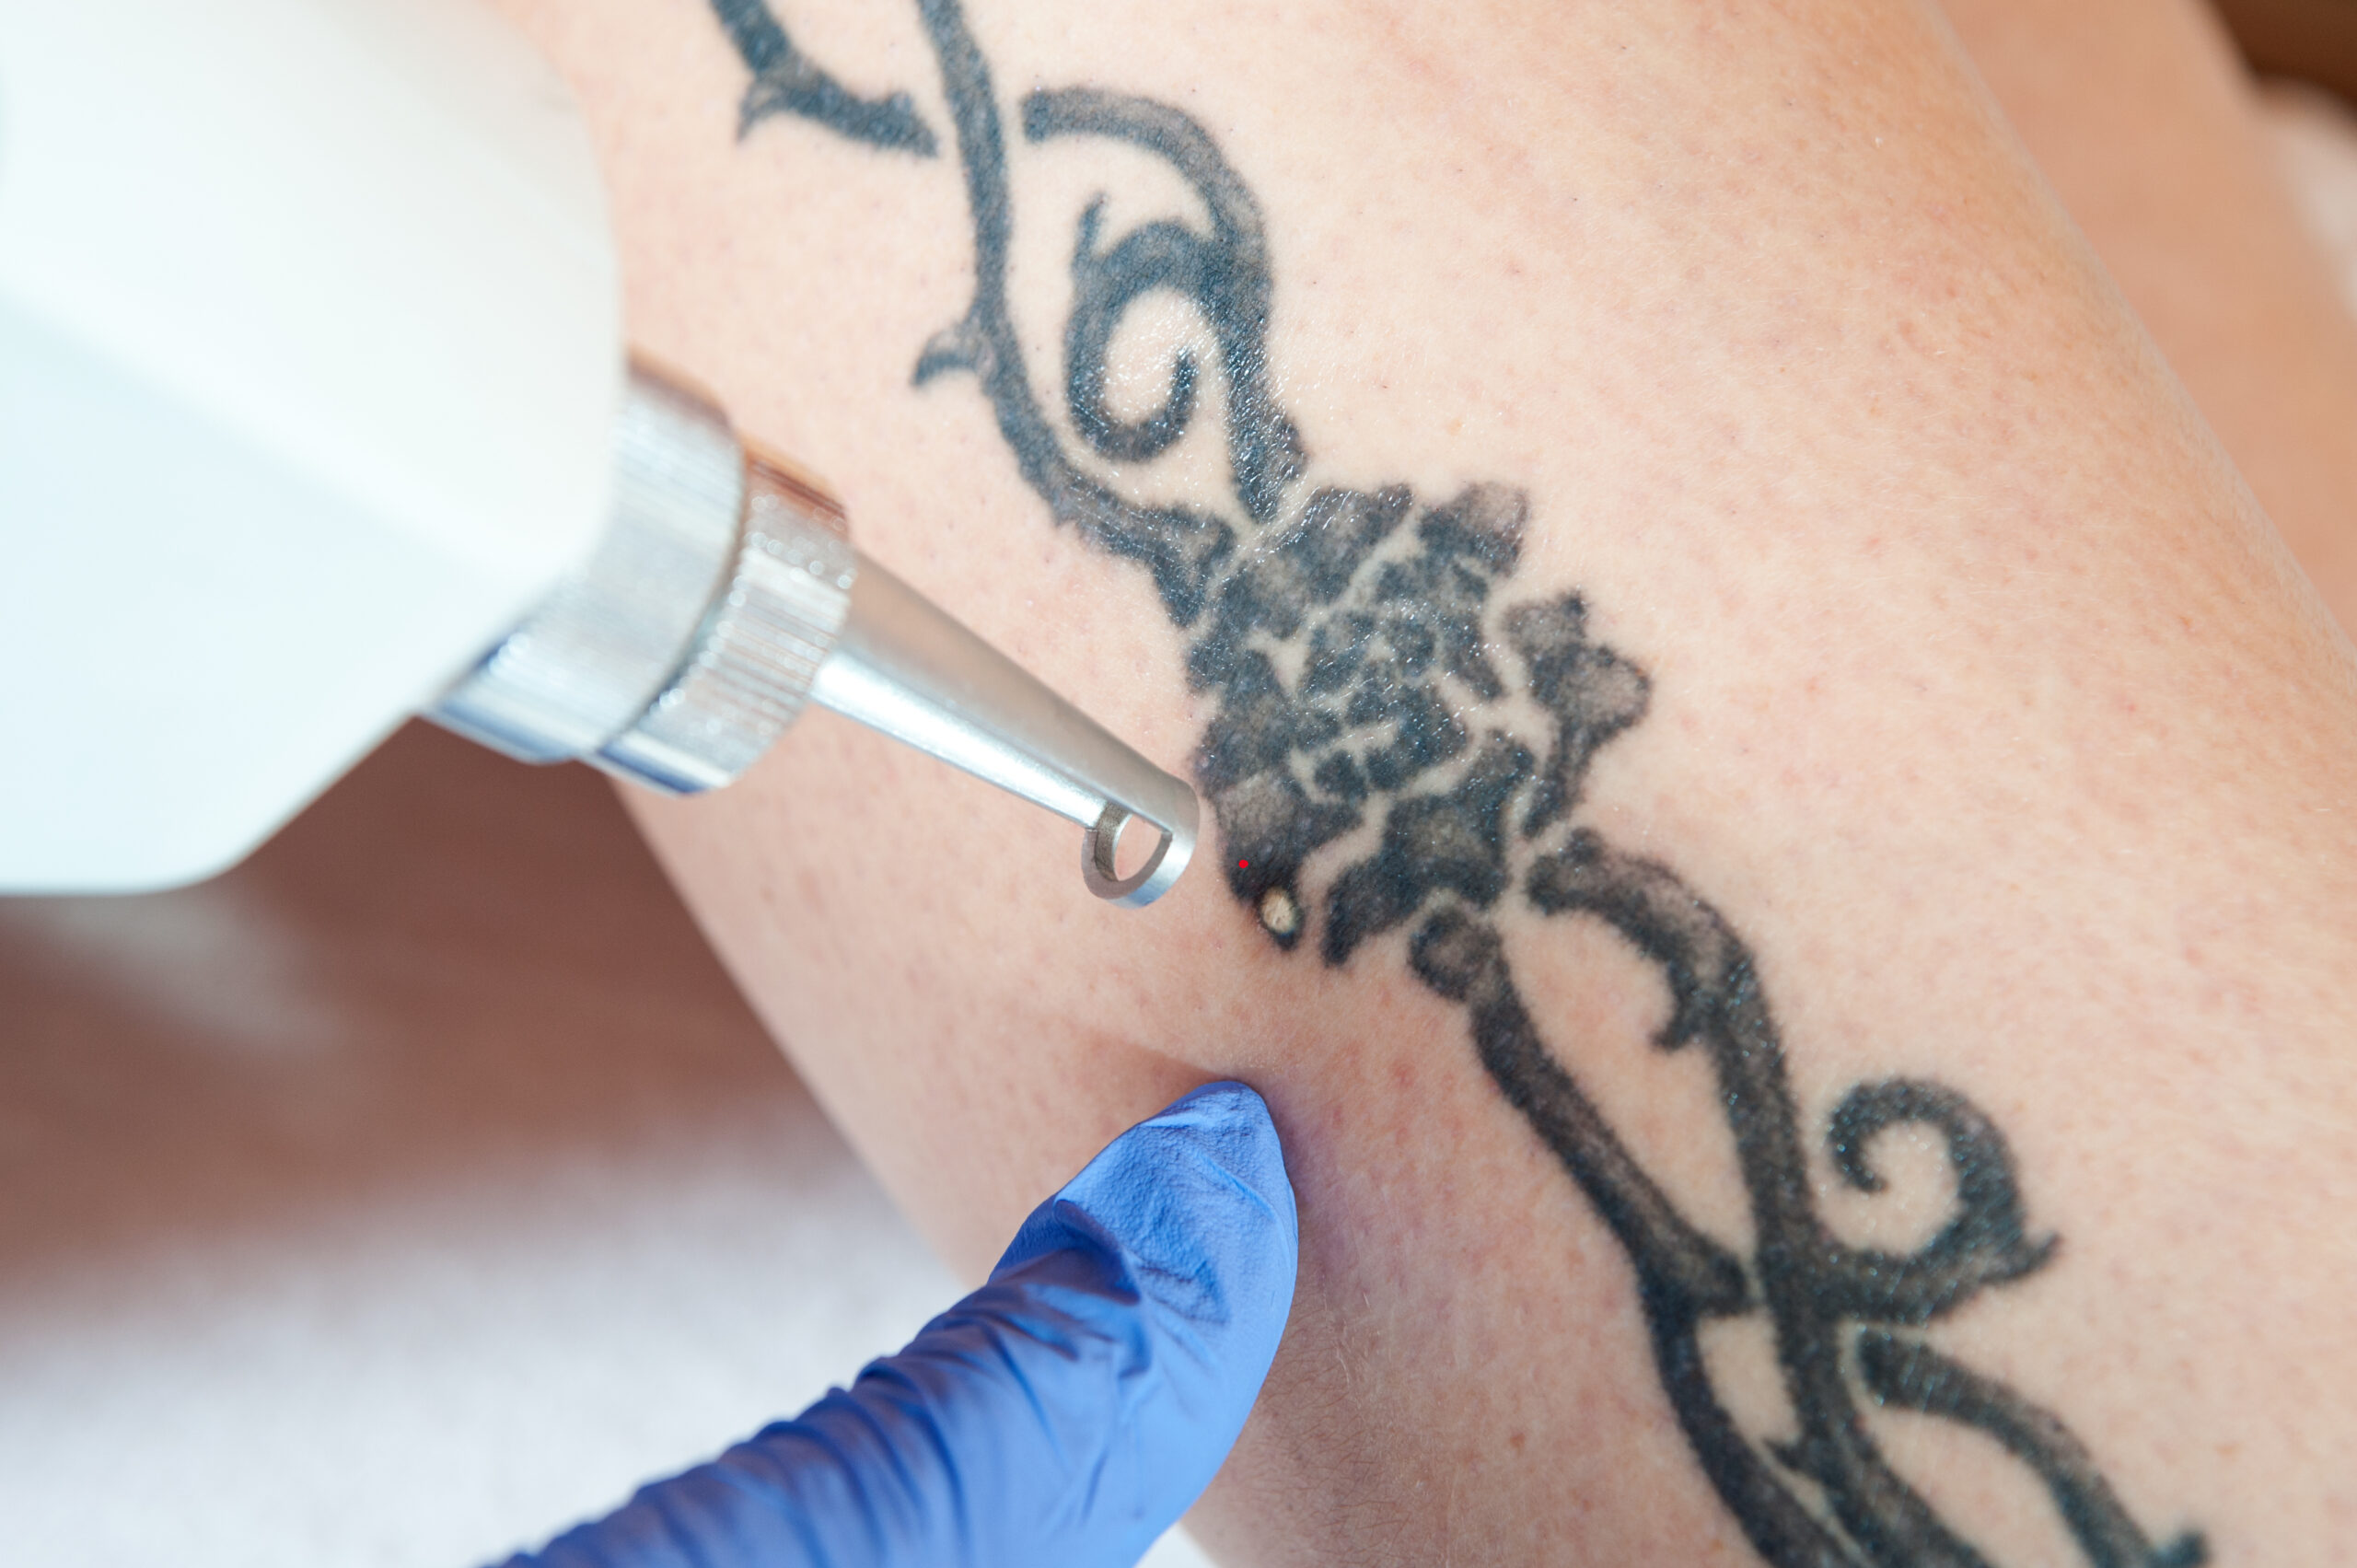 Life | Free Full-Text | Q-Switched 1064/532 nm Laser with Nanosecond Pulse  in Tattoo Treatment: A Double-Center Retrospective Study